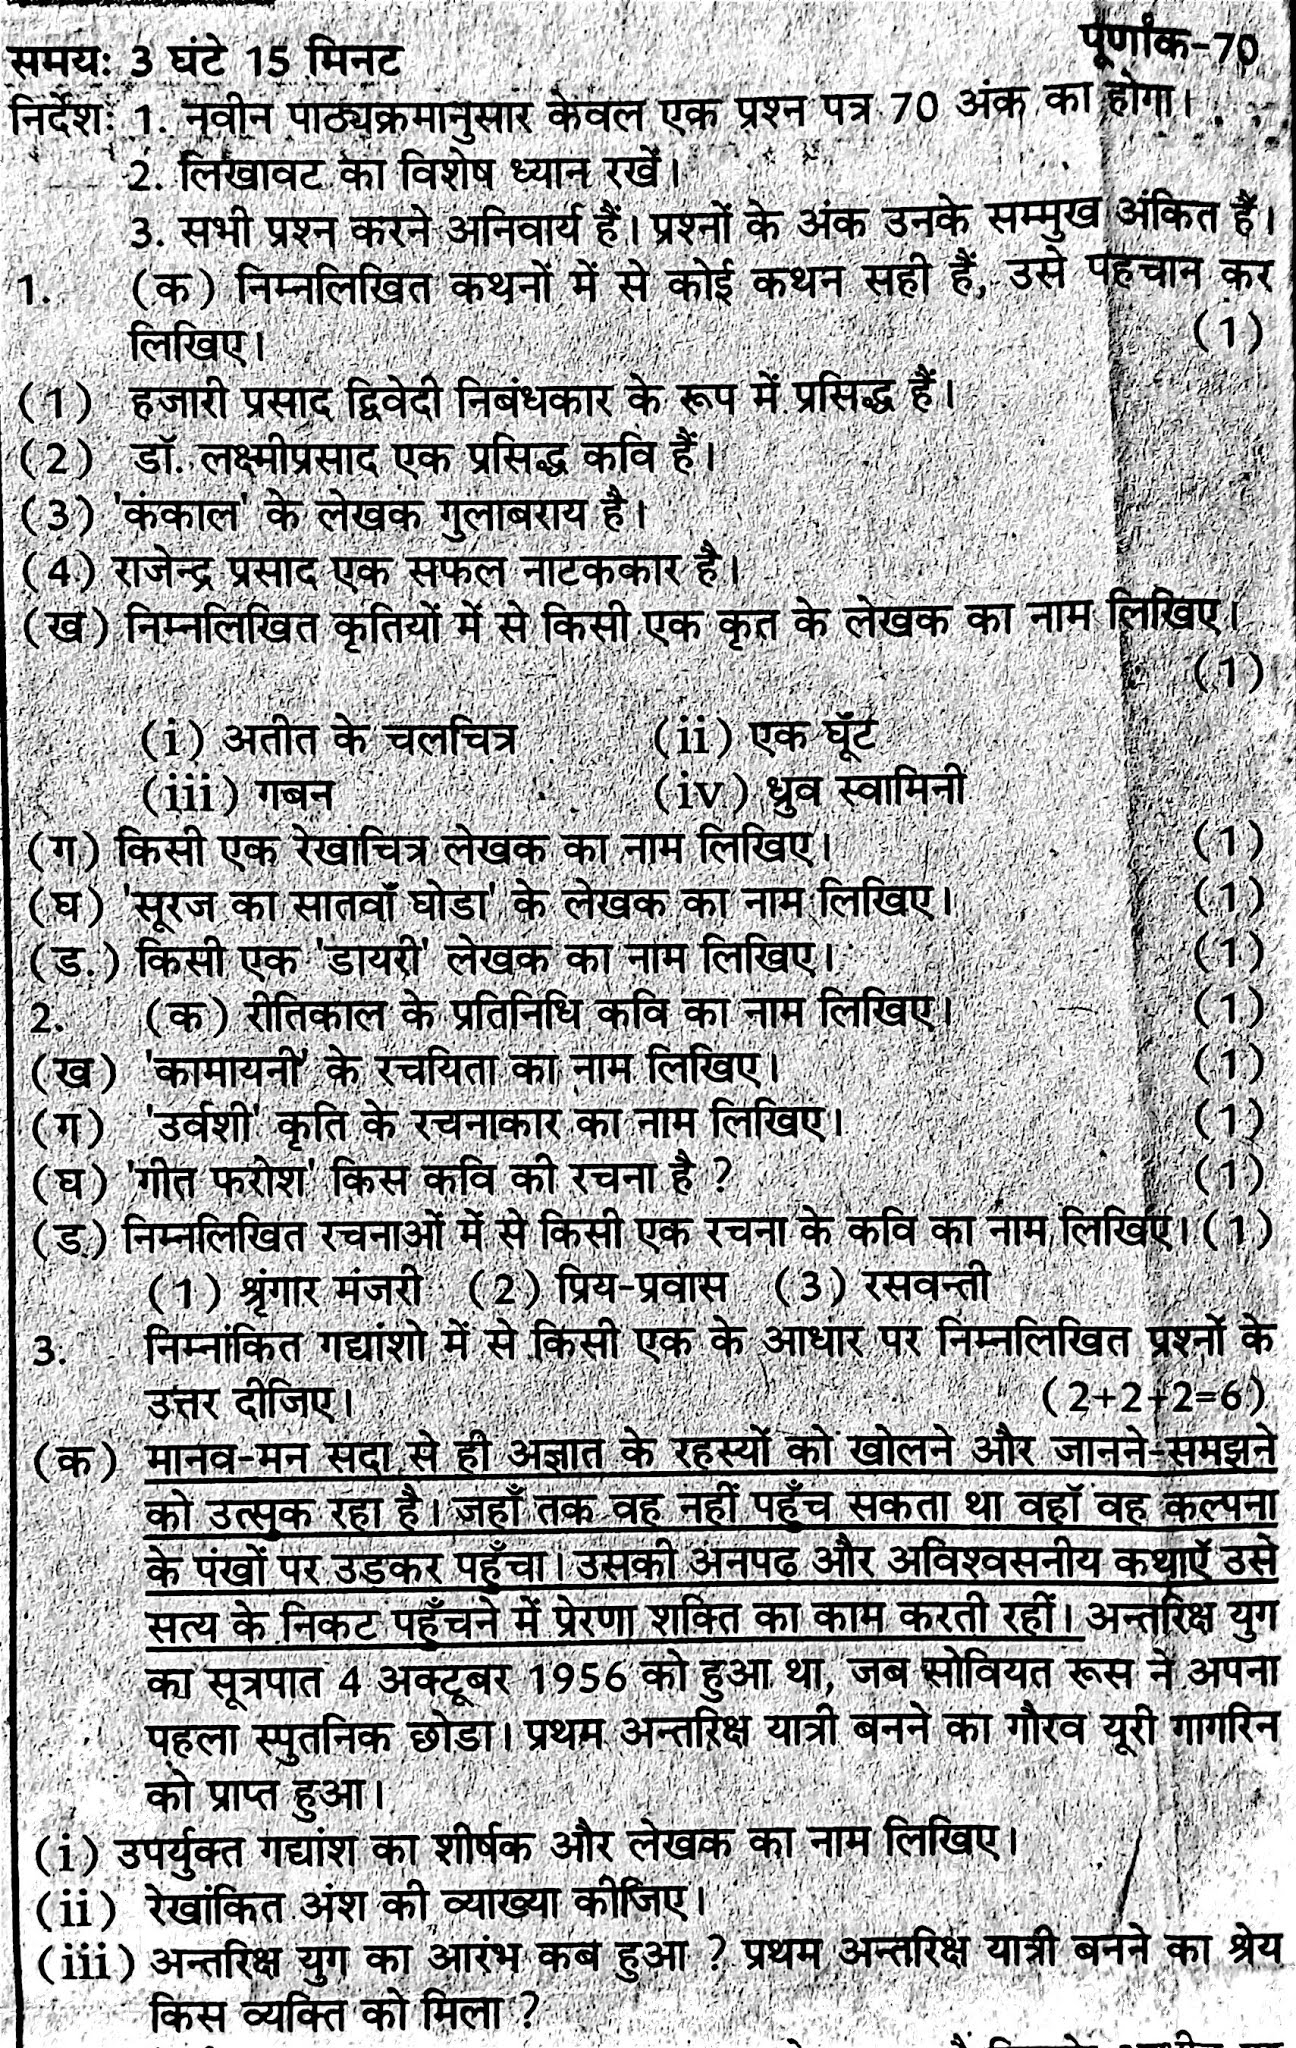 UP Board Hindi Sample Question Paper for Students of High School or 10th